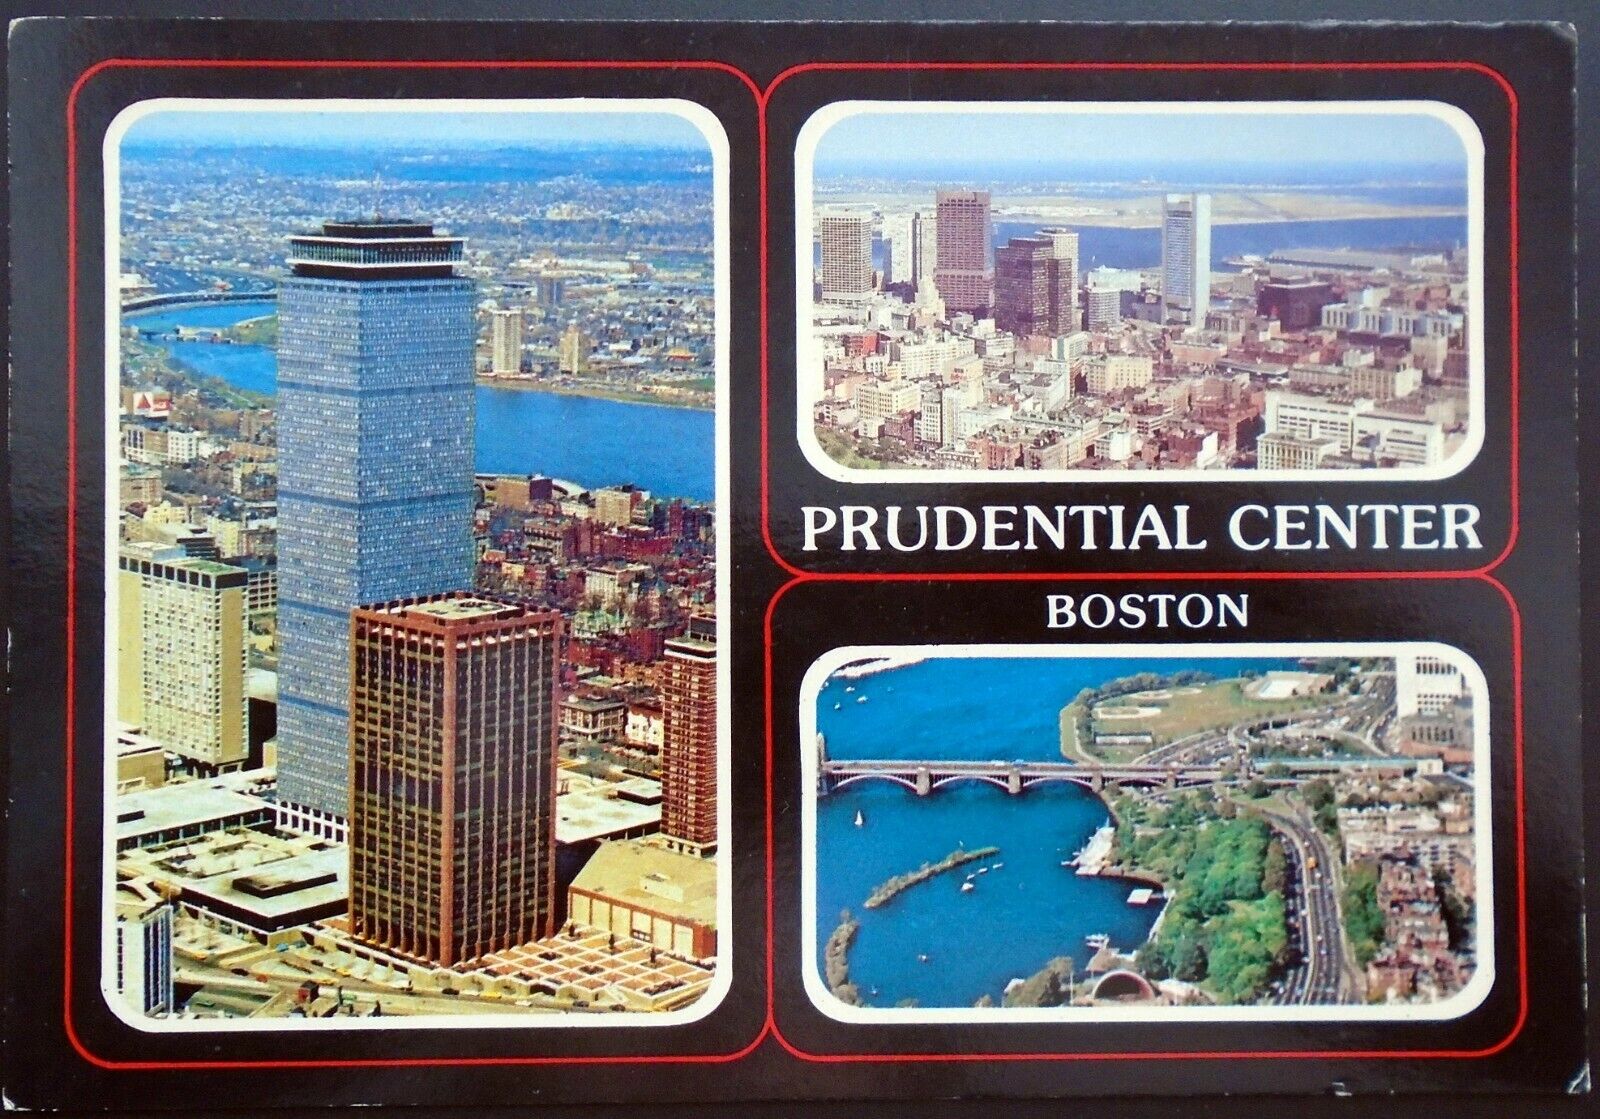 1980s Views of Boston and the Prudential Center (Building), Boston, MA 